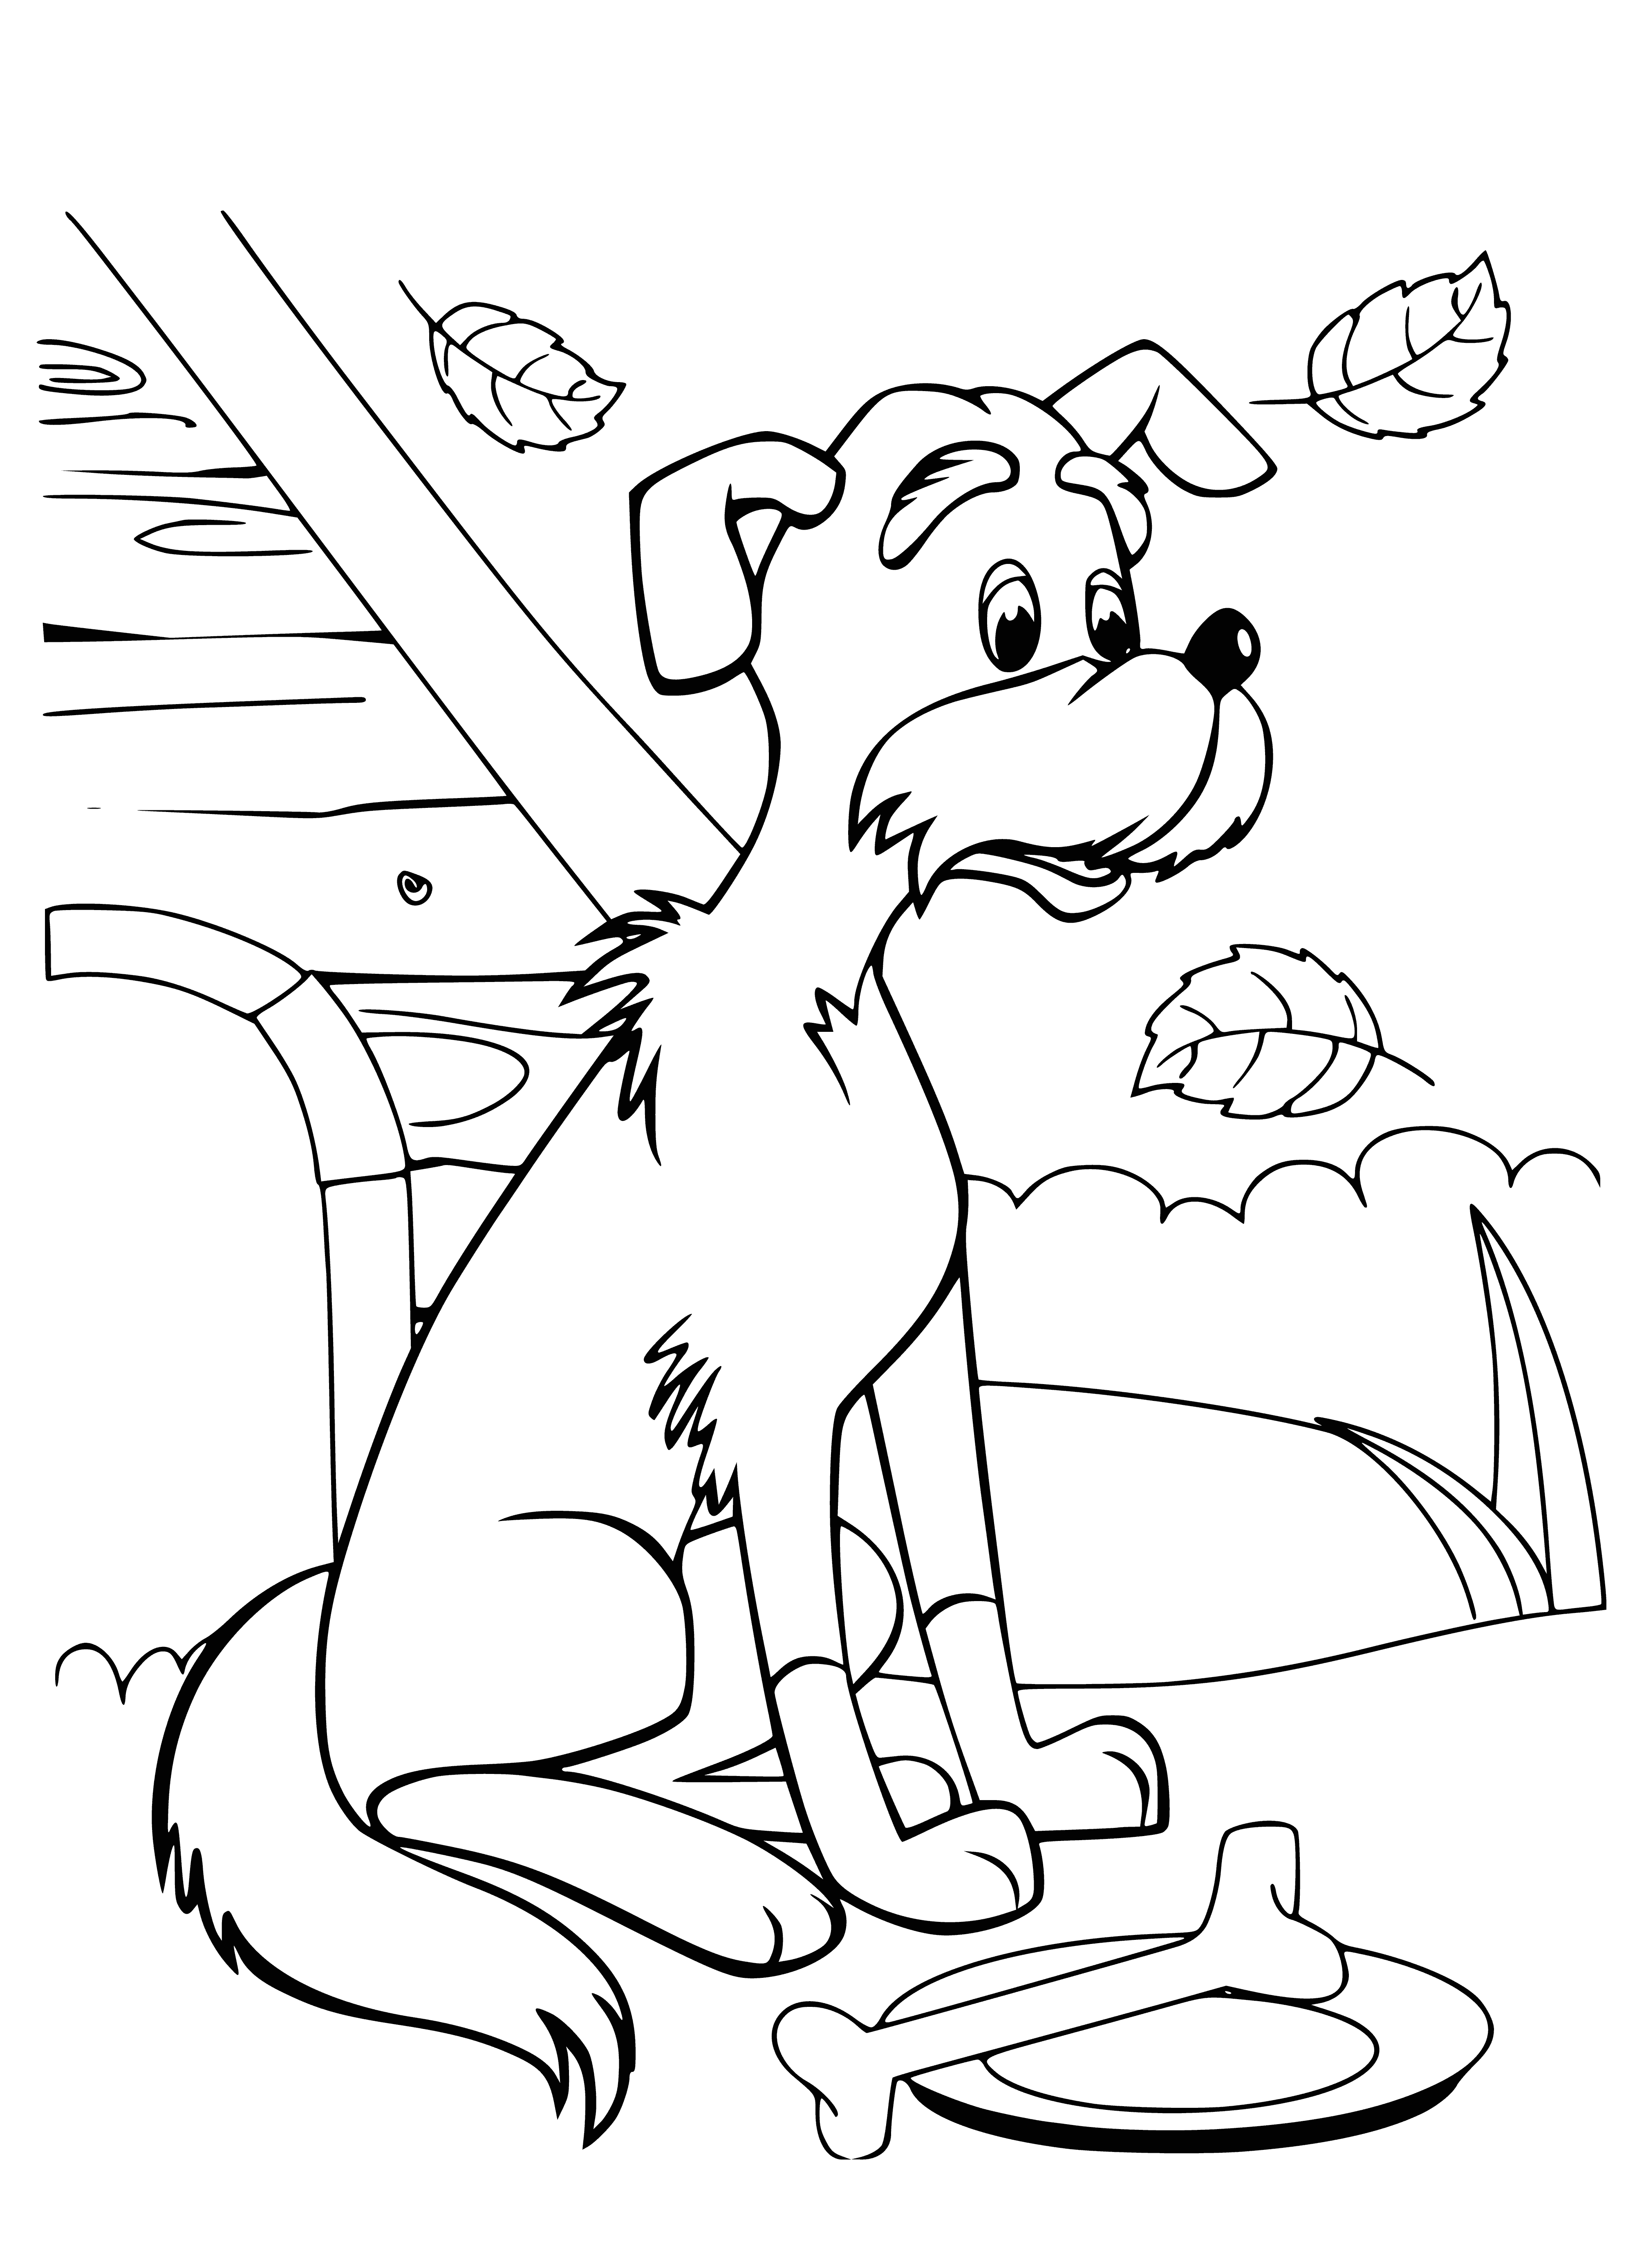 coloring page: Kitten named Woof, a guard dog, has a brown coat & white belly. Eyes closed, looks like it's sleeping peacefully on the ground. #Cuteanimals